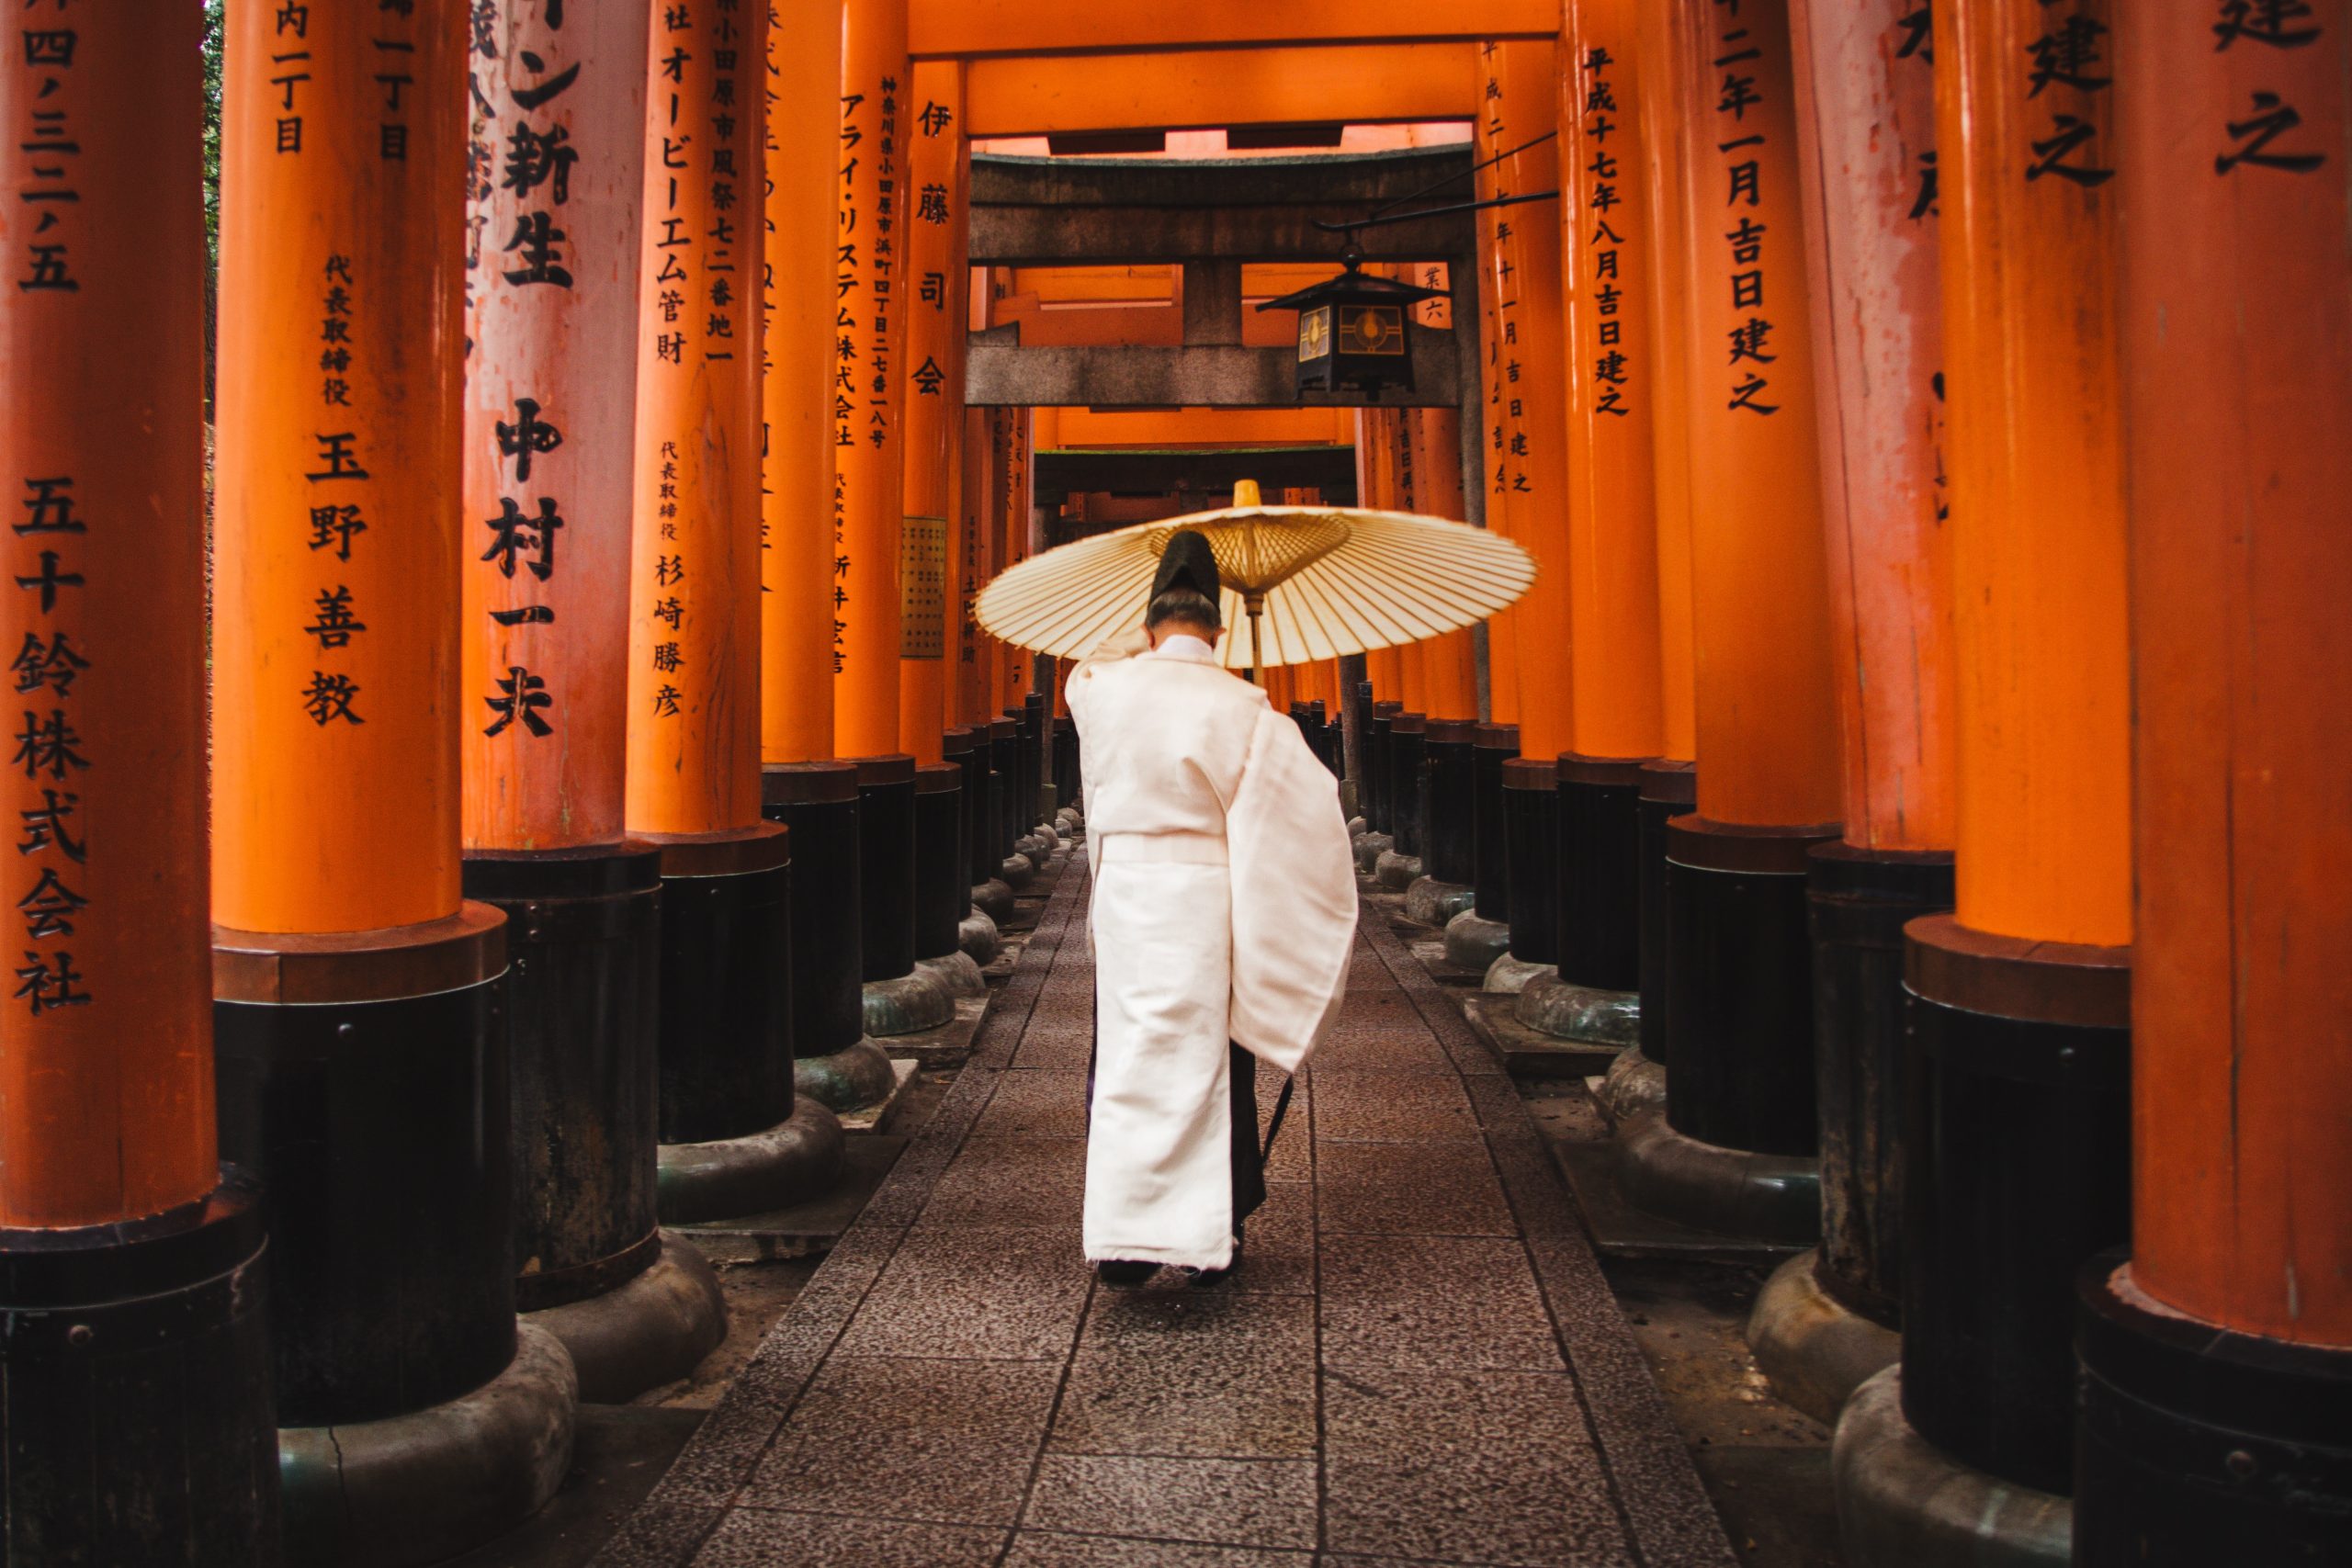 Japan is a beautiful country – get a visa and start working here